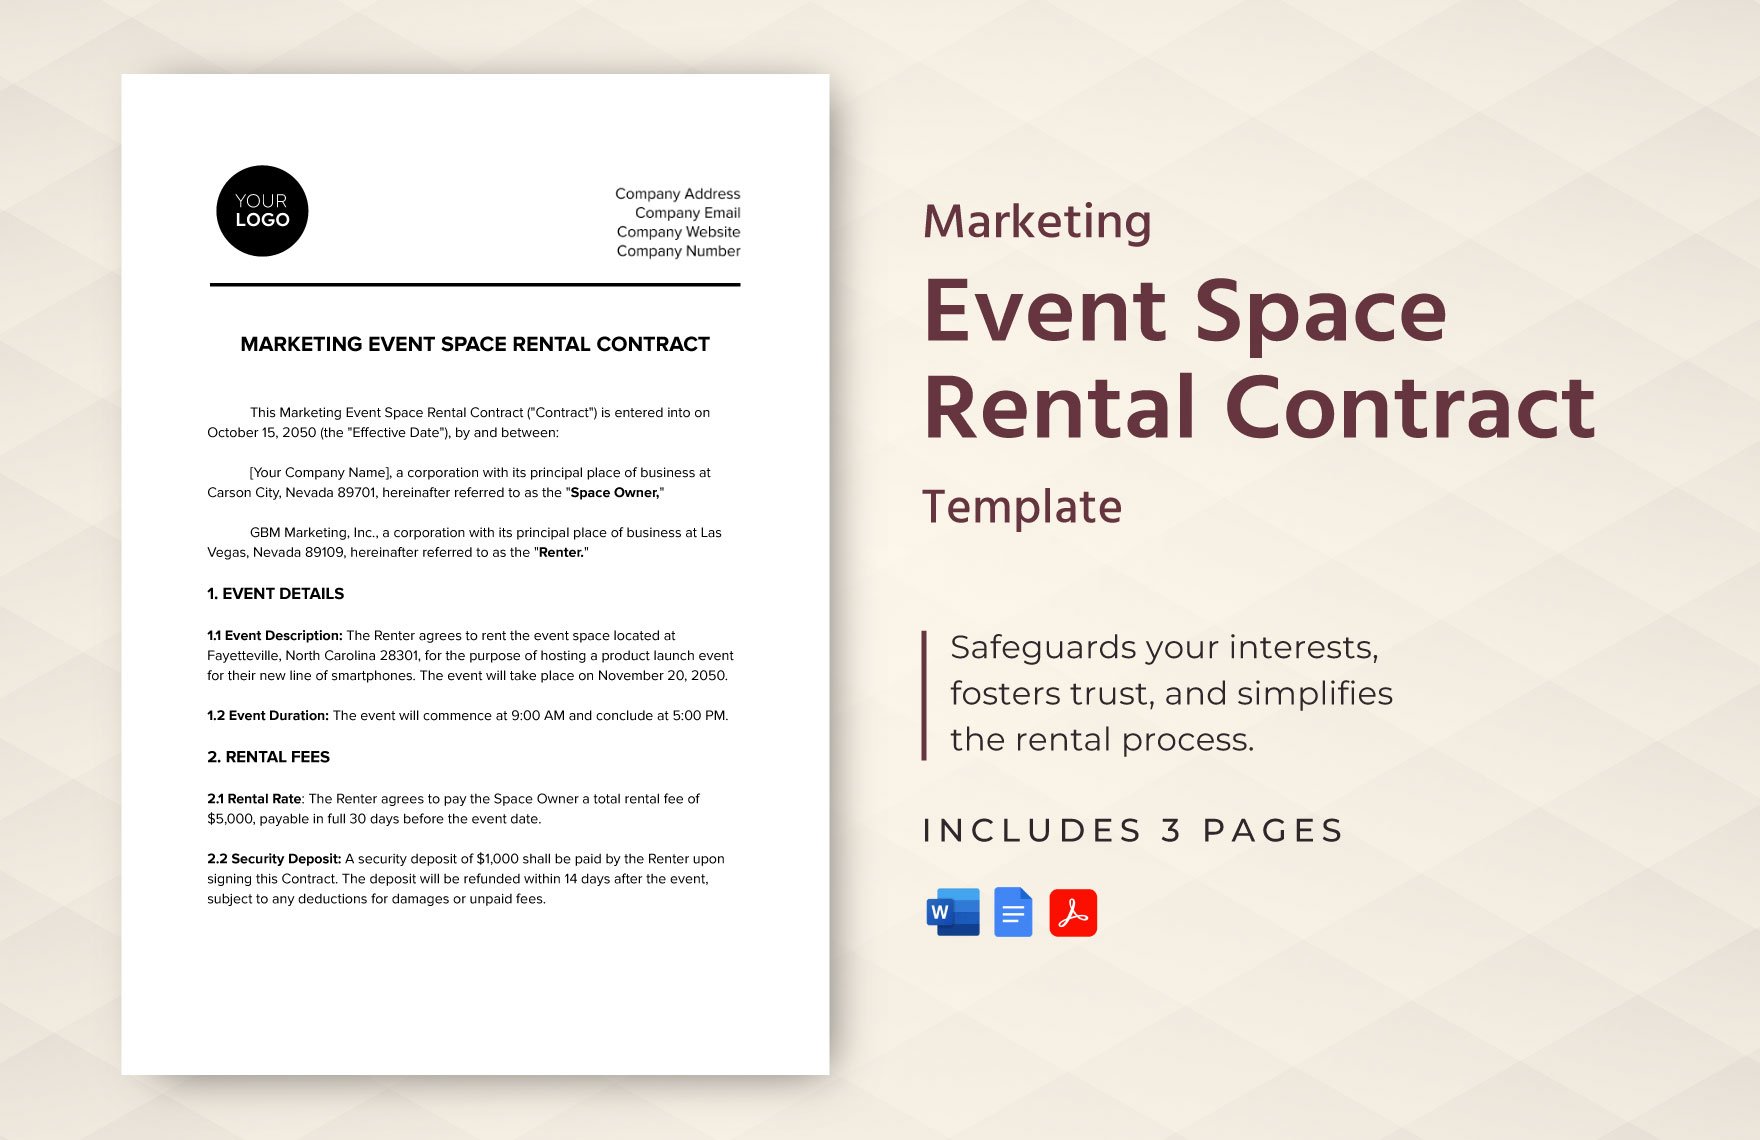 Marketing Event Space Rental Contract Template in Word, Google Docs, PDF